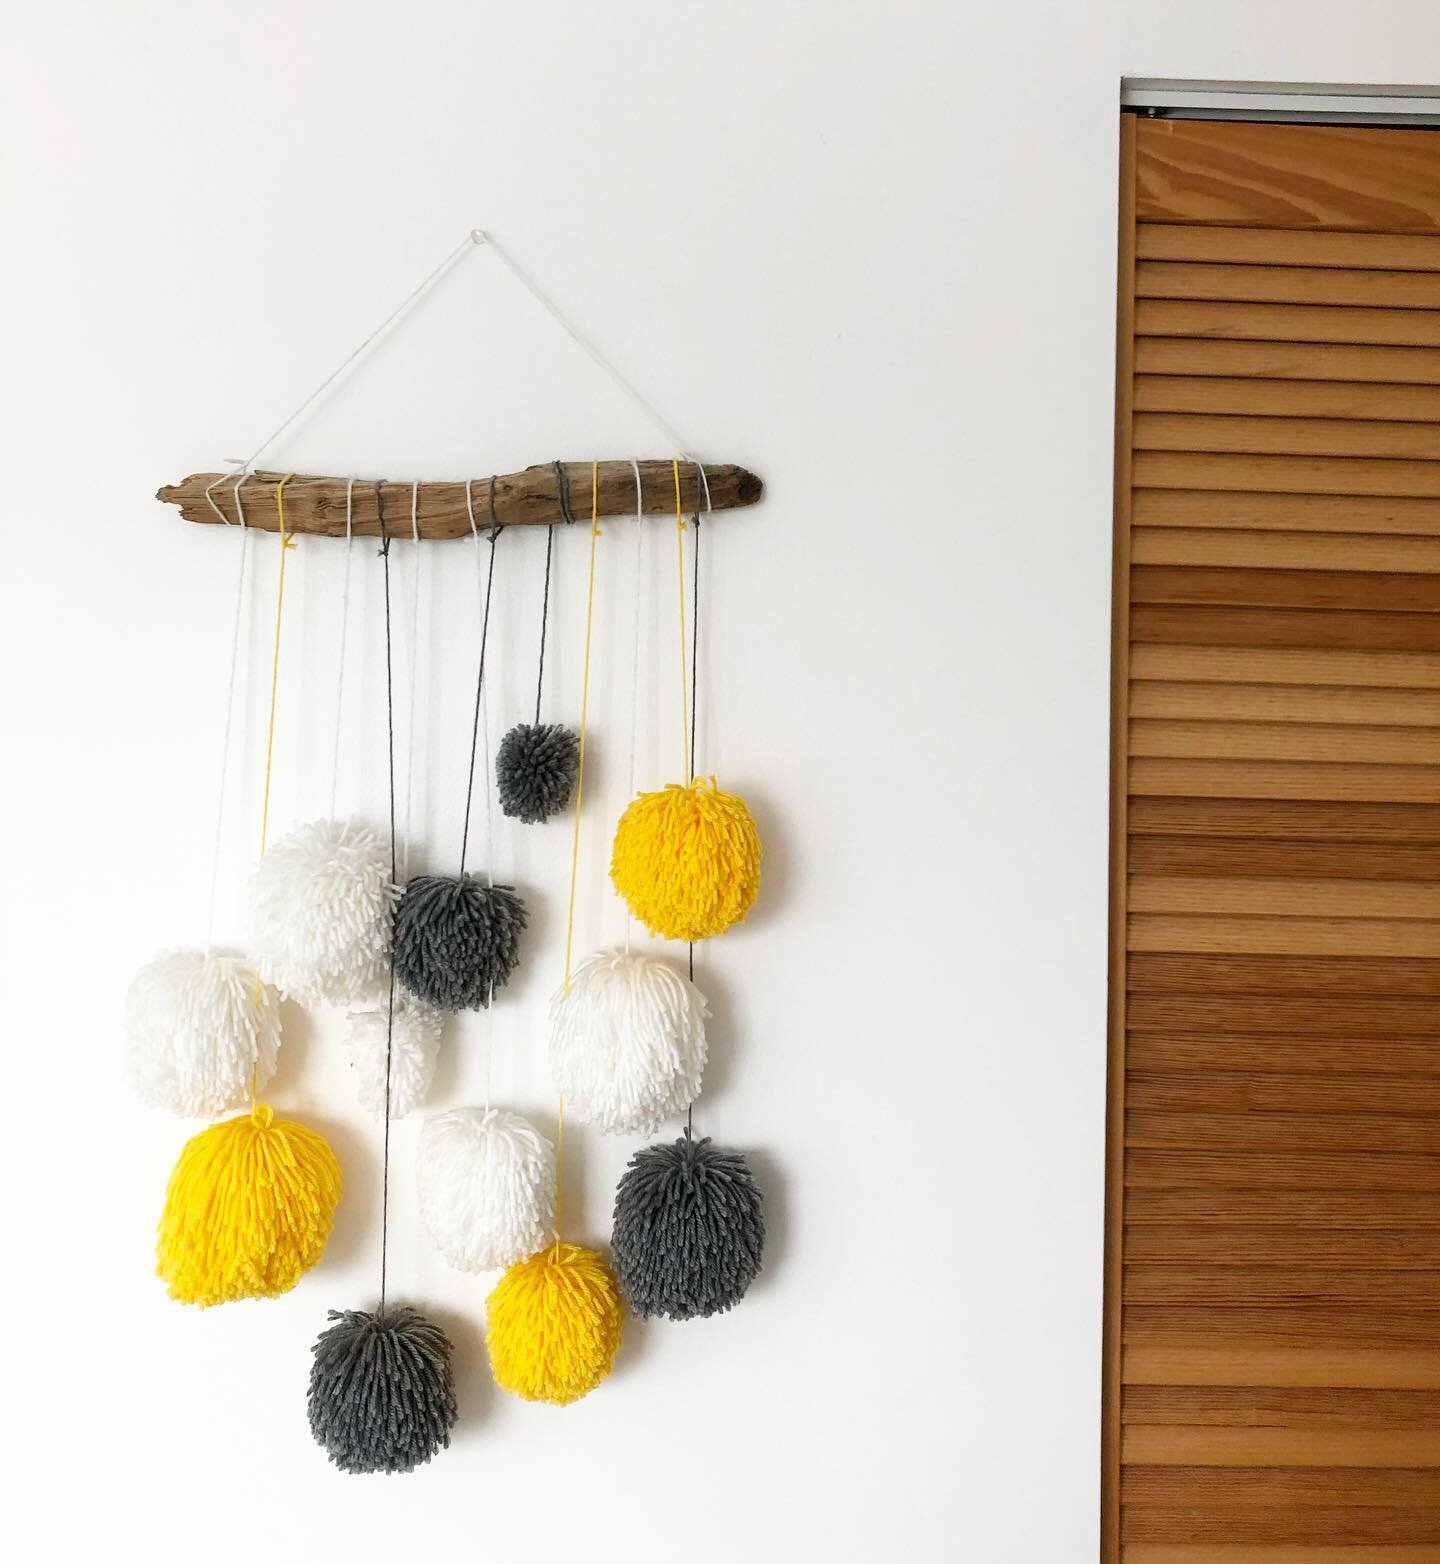 Happy Family Day to you all. Just wanted to share with you this cute wall hanging that I made a few years back. If you&rsquo;re looking for something to do this weekend why not get crafty with a fun project like this. 🧶🍋👍🏼💛